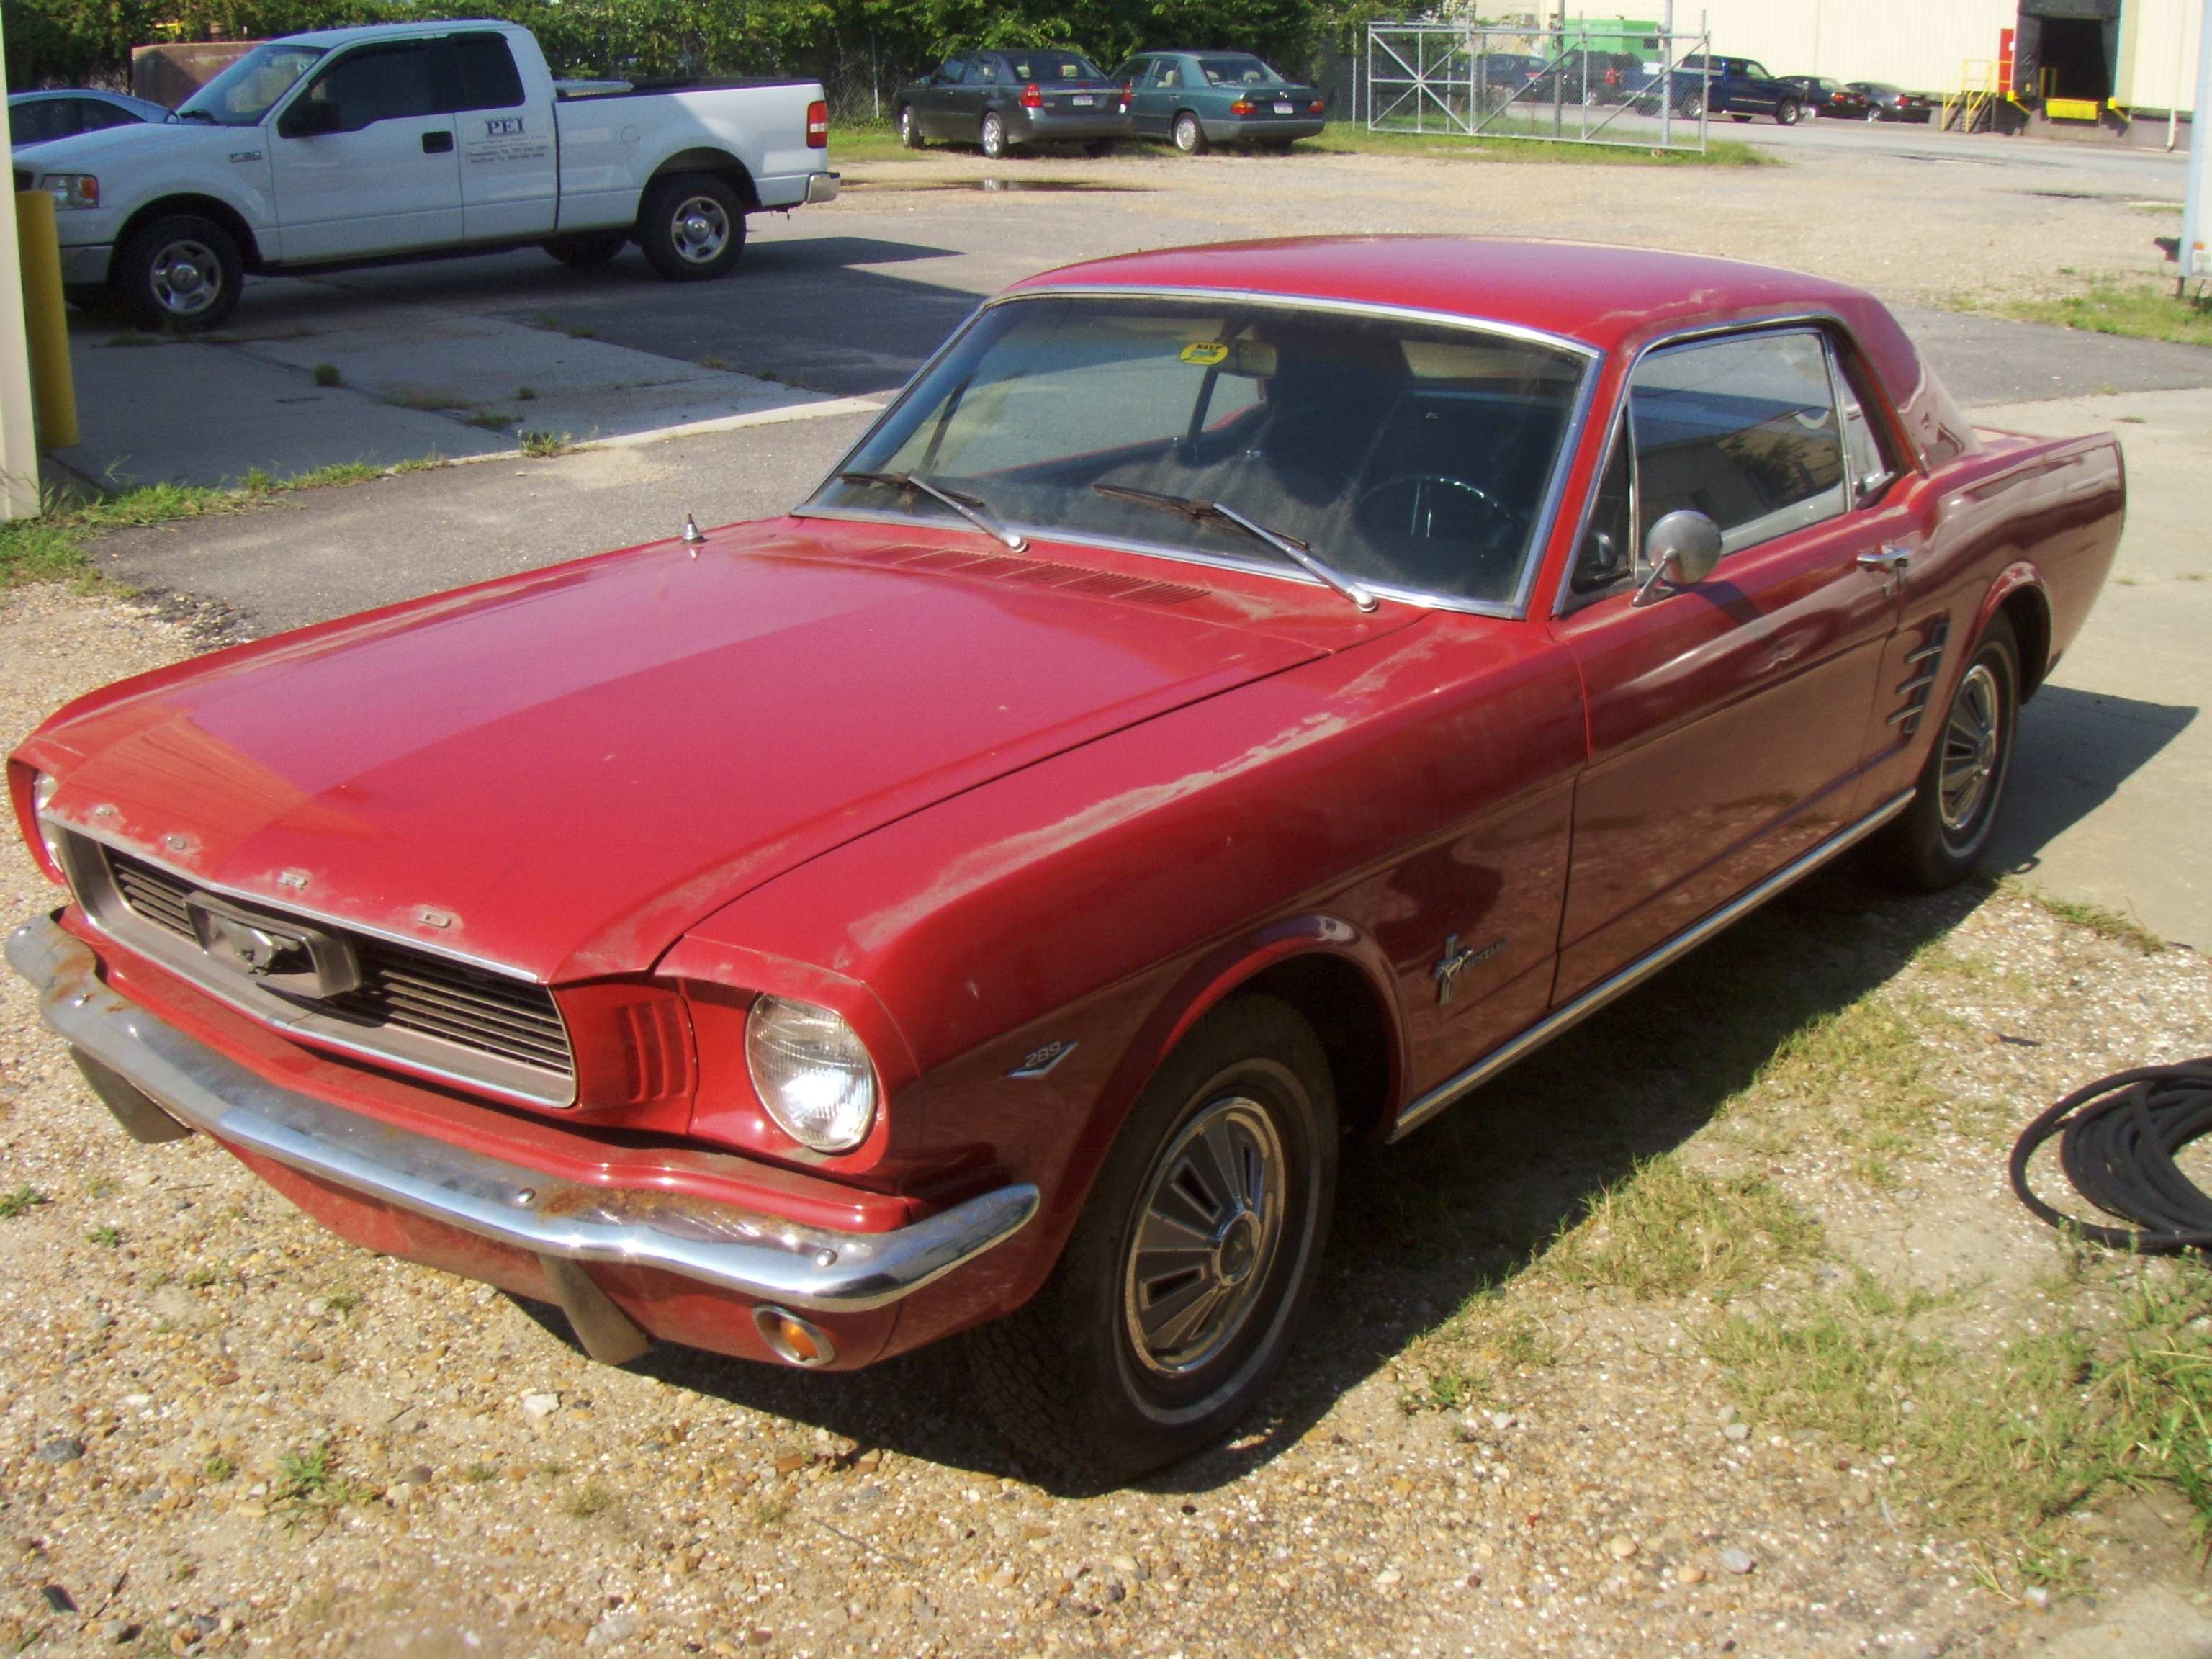 York Poole's 1966 Mustang